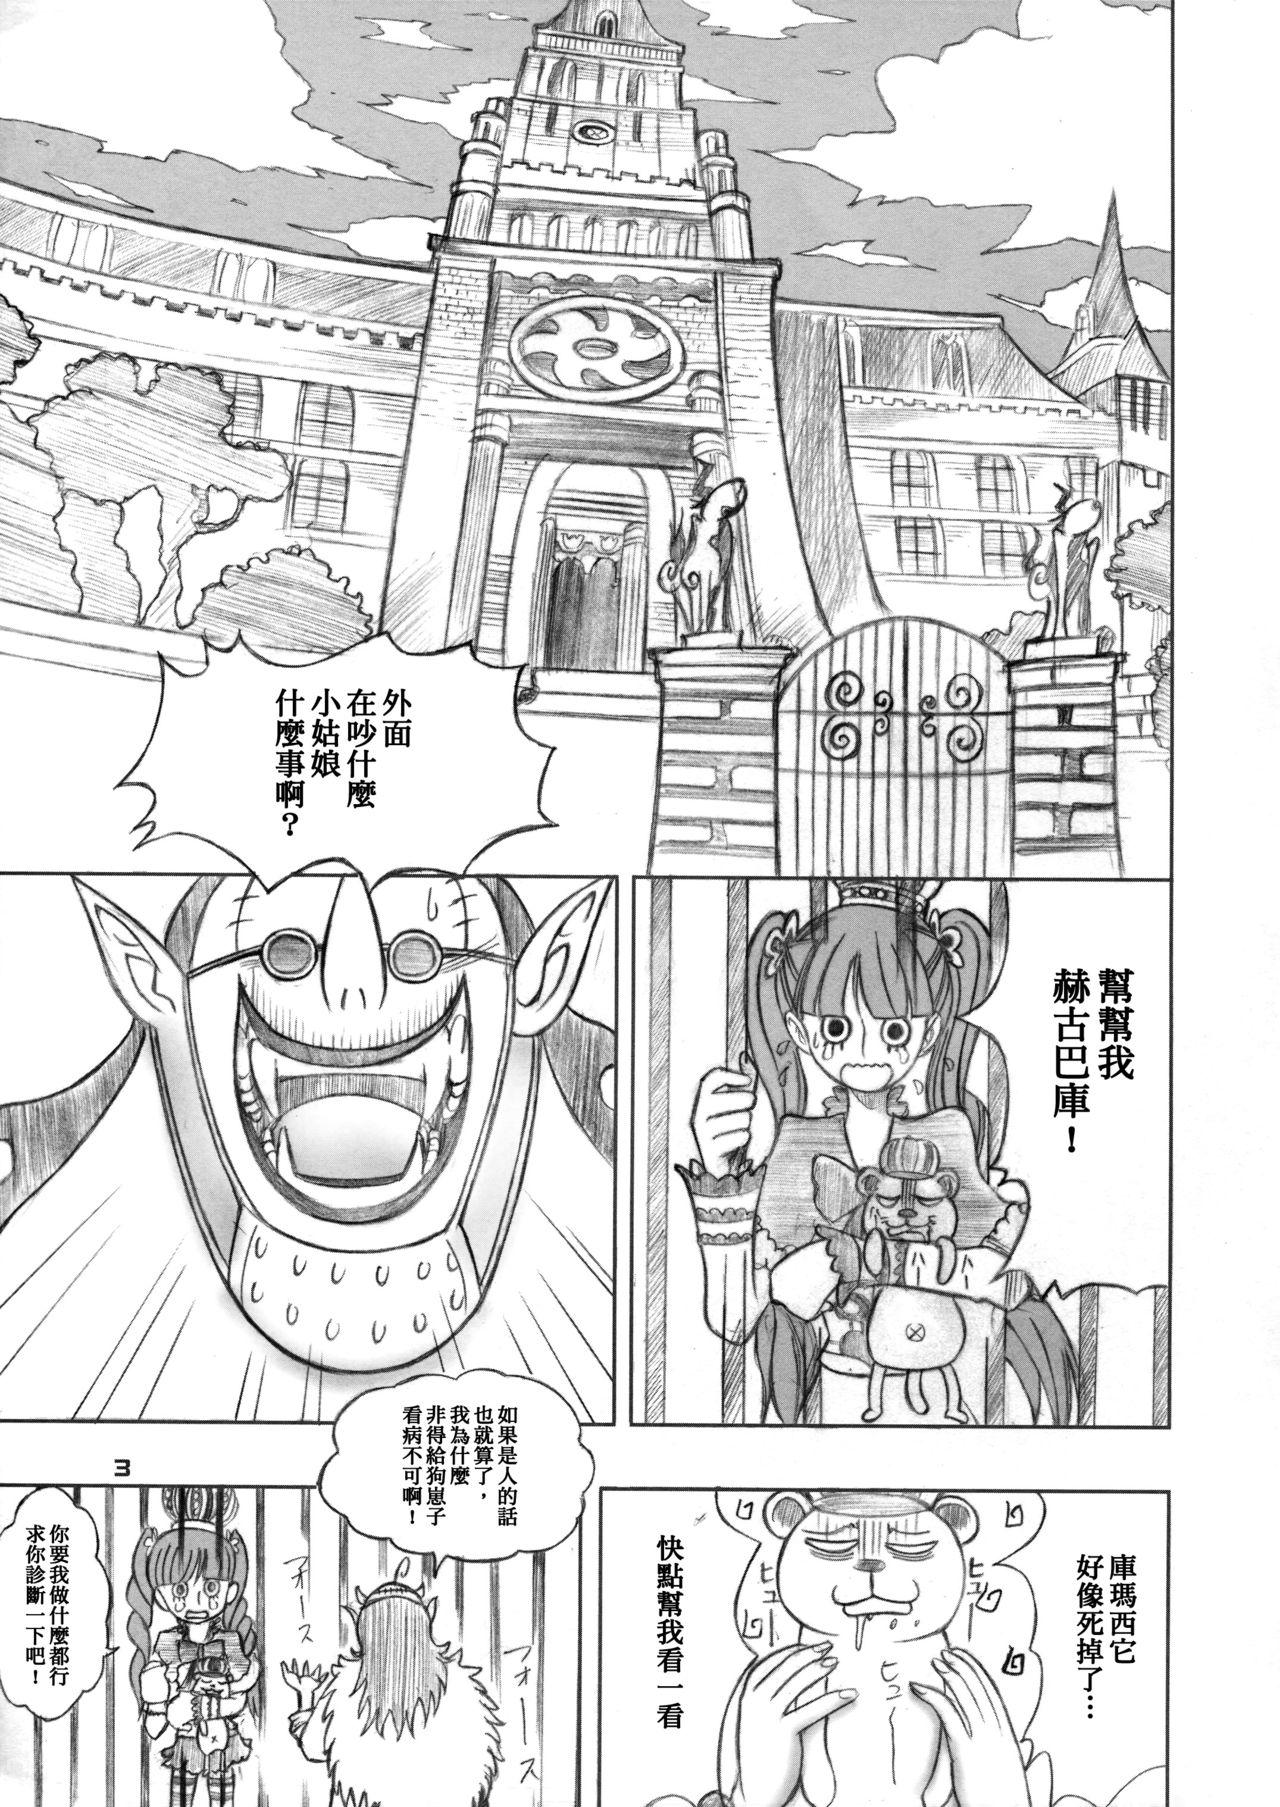 Shemale Porn PERONAKIDAN | 培羅娜奇談 - One piece Butthole - Page 3